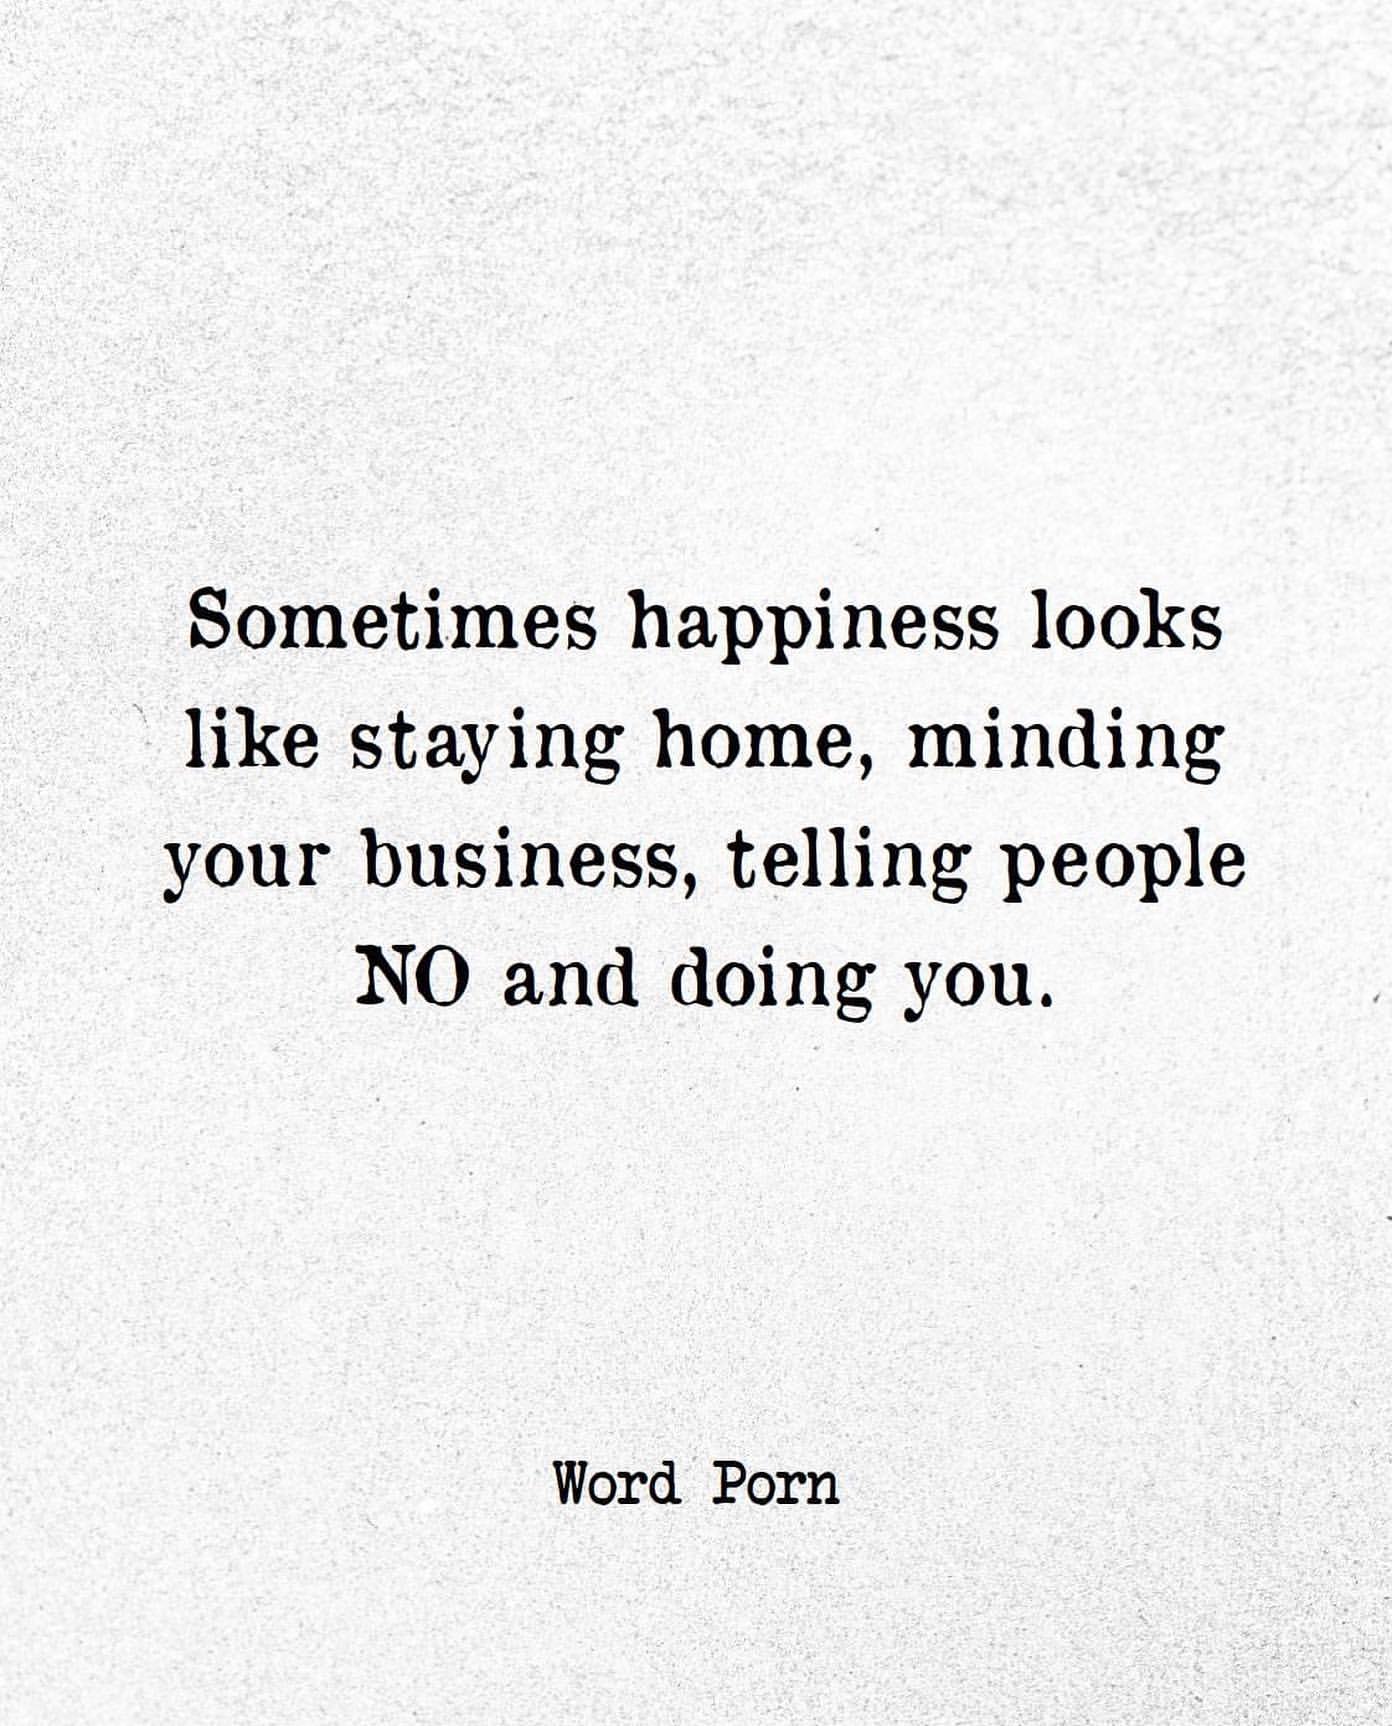 Sometimes happiness looks like staying home, minding your business, telling people no and doing you.